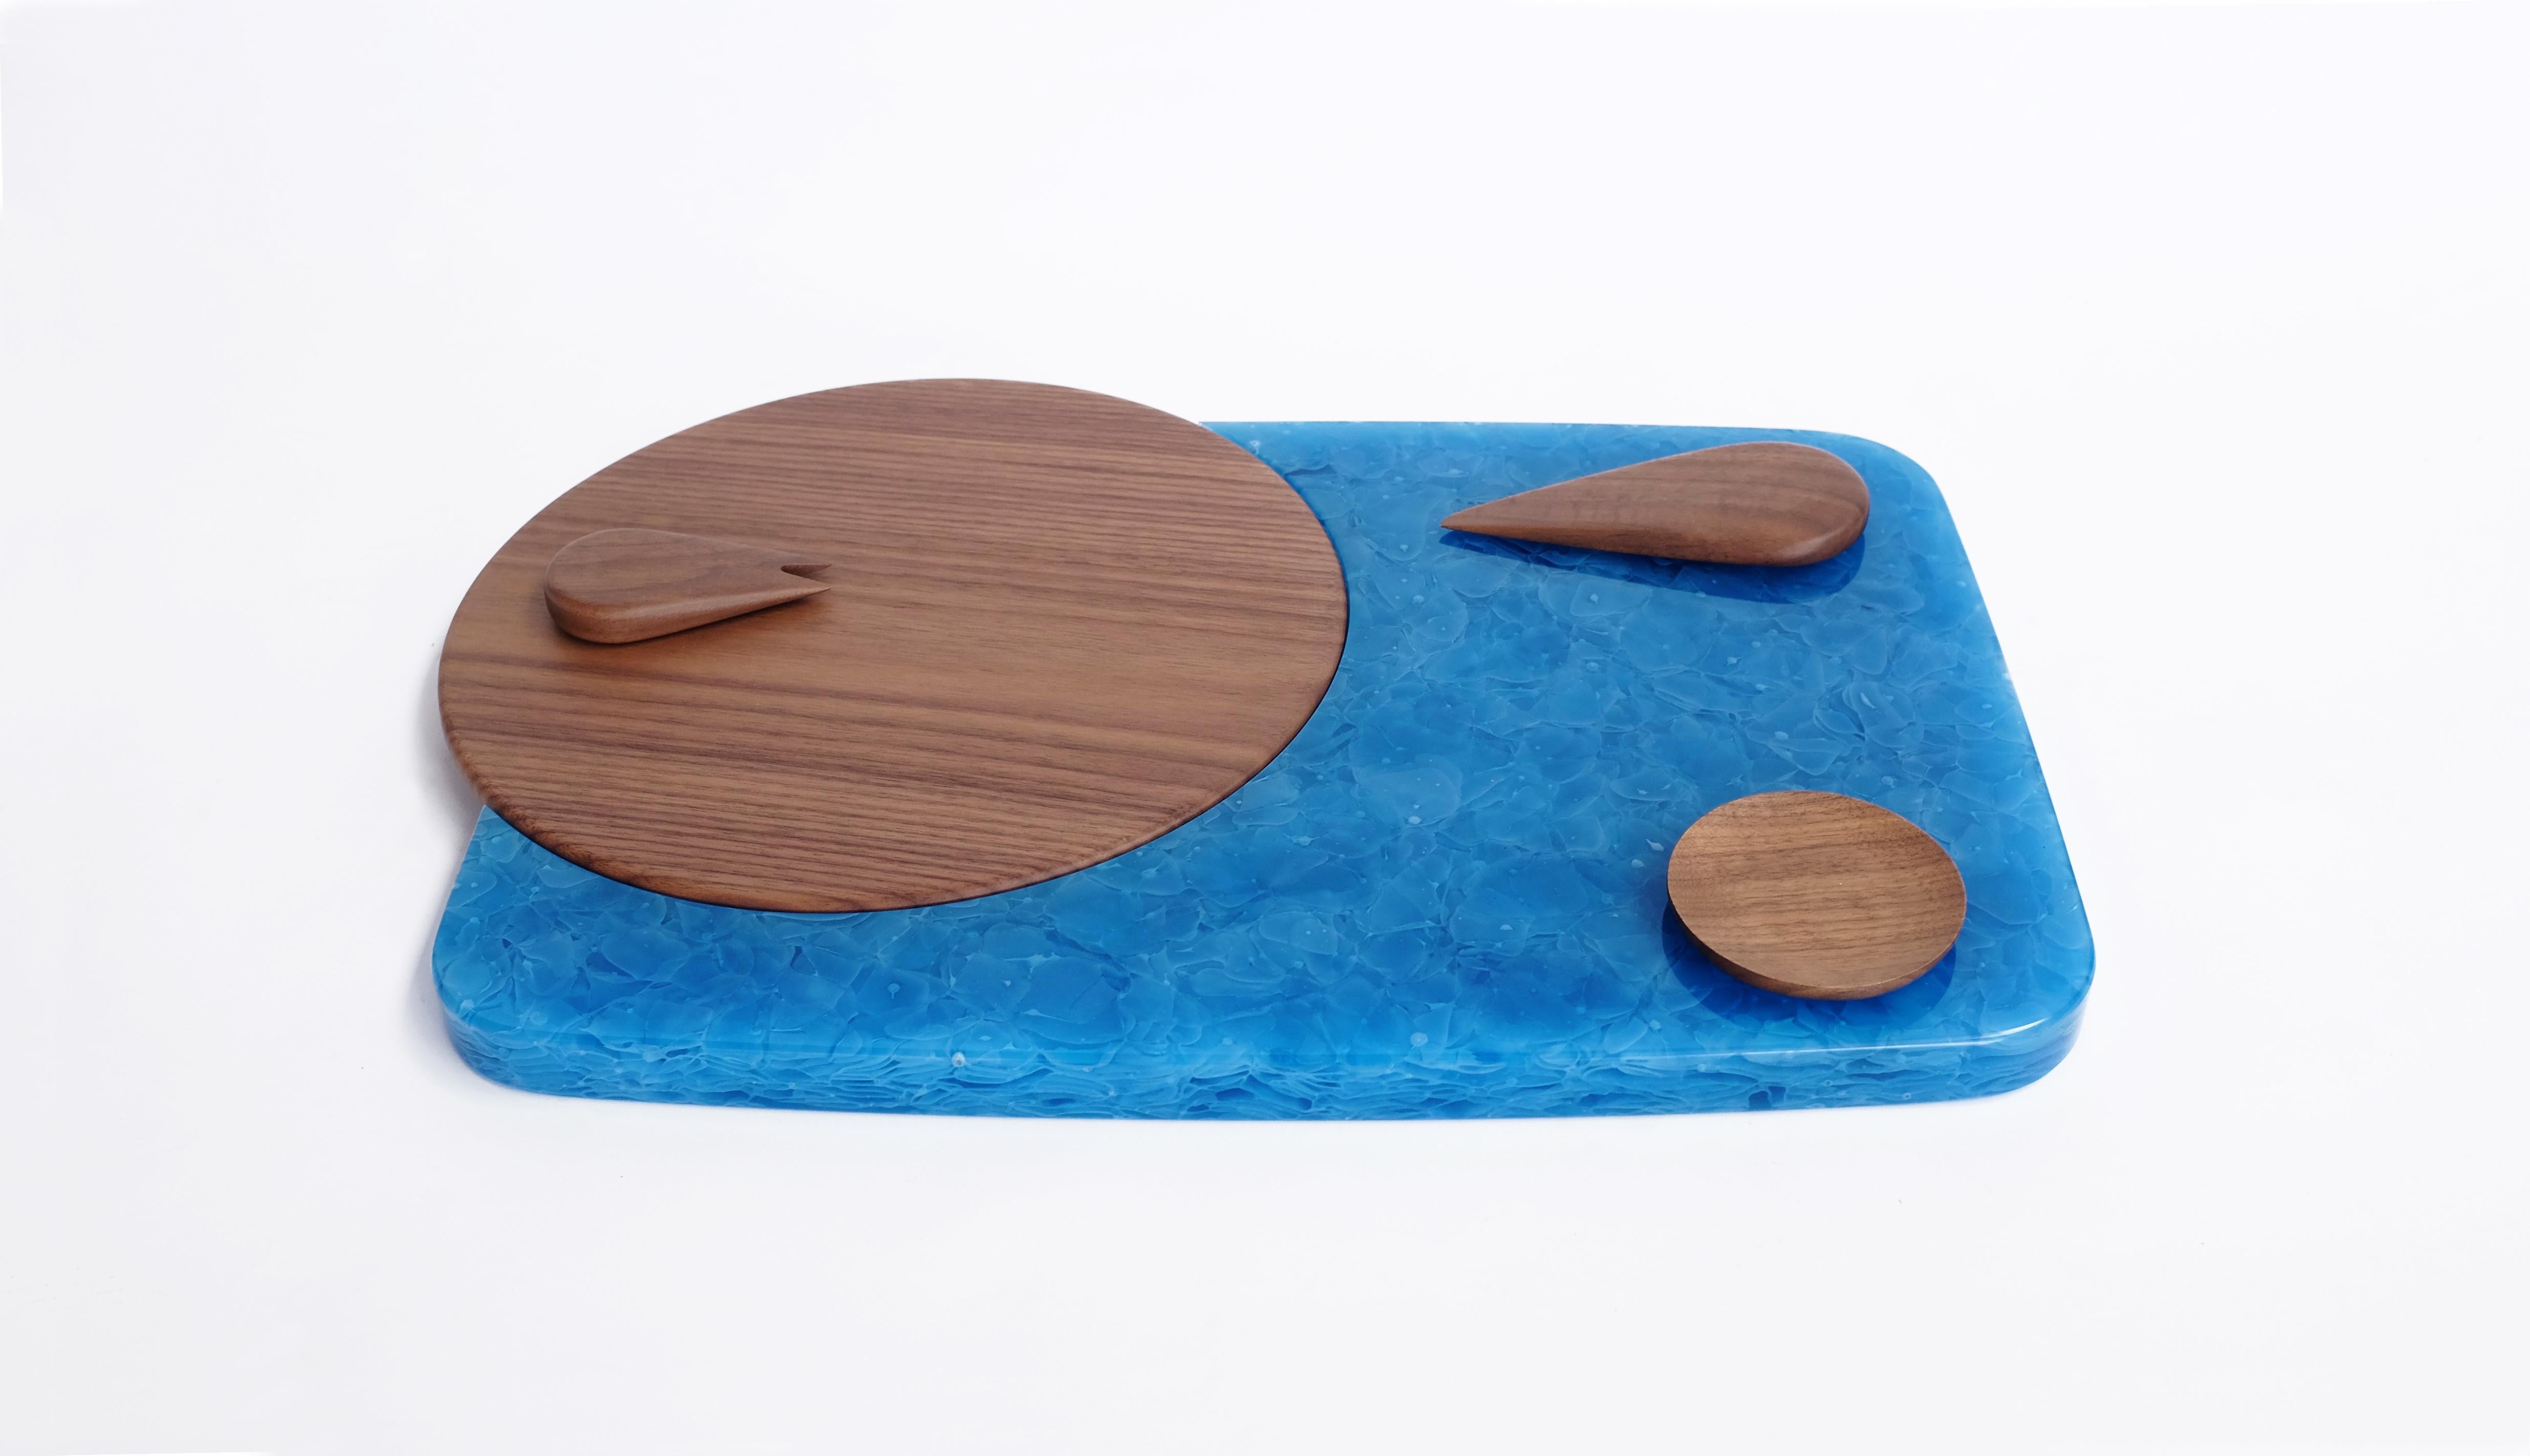 Cheese platter designed for wallpaper handmade exhibition in Milan, 2015

Designers Laetitia de Allegri and Matteo Fogale took inspiration from the shapes of cheese. Manufacturer Ceccotti Collezioni then crafted a circular American walnut display